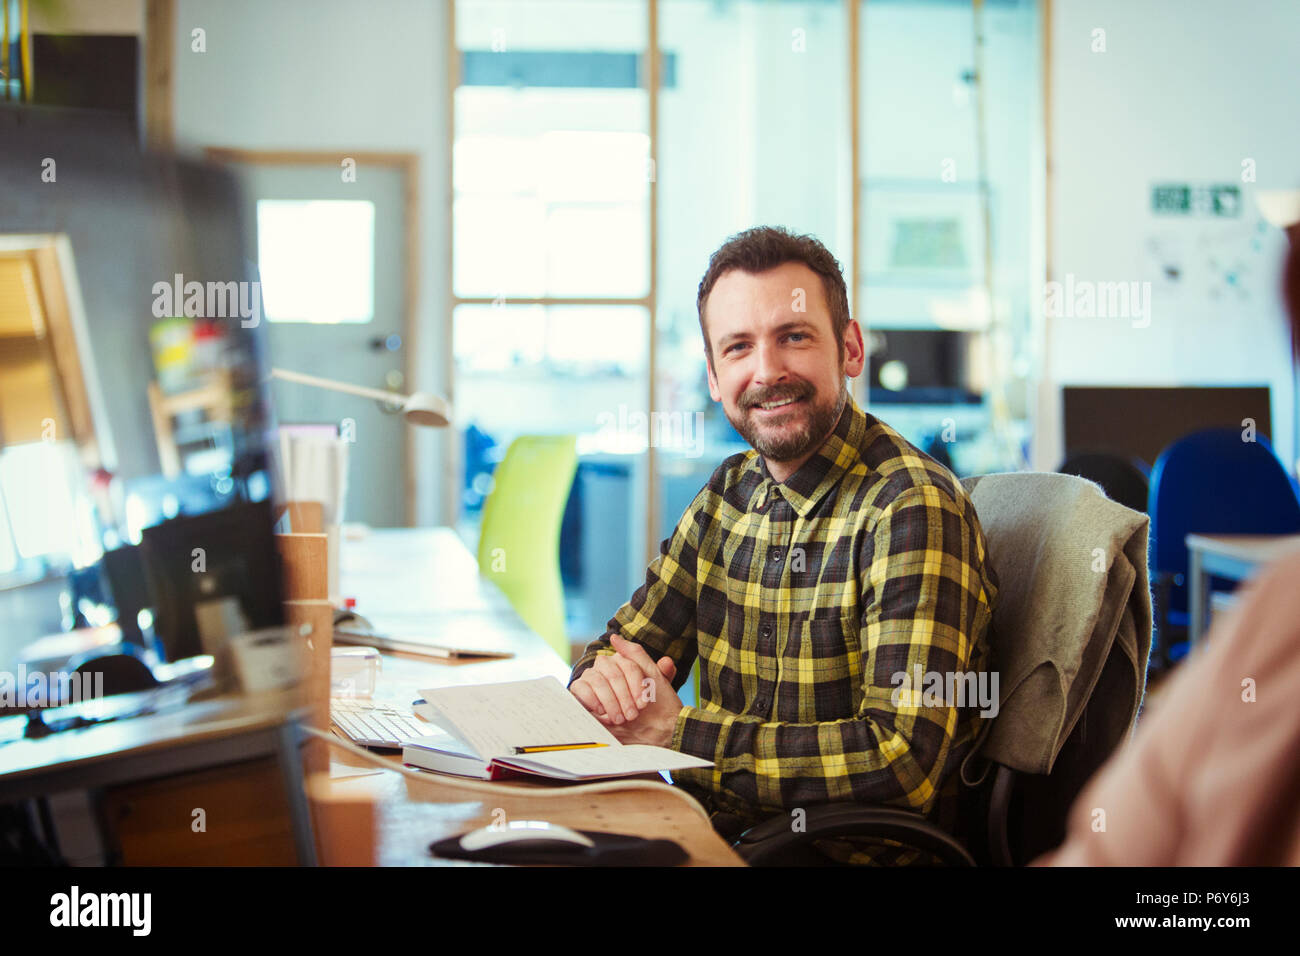 Portrait smiling, confident creative businessman working in office Stock Photo